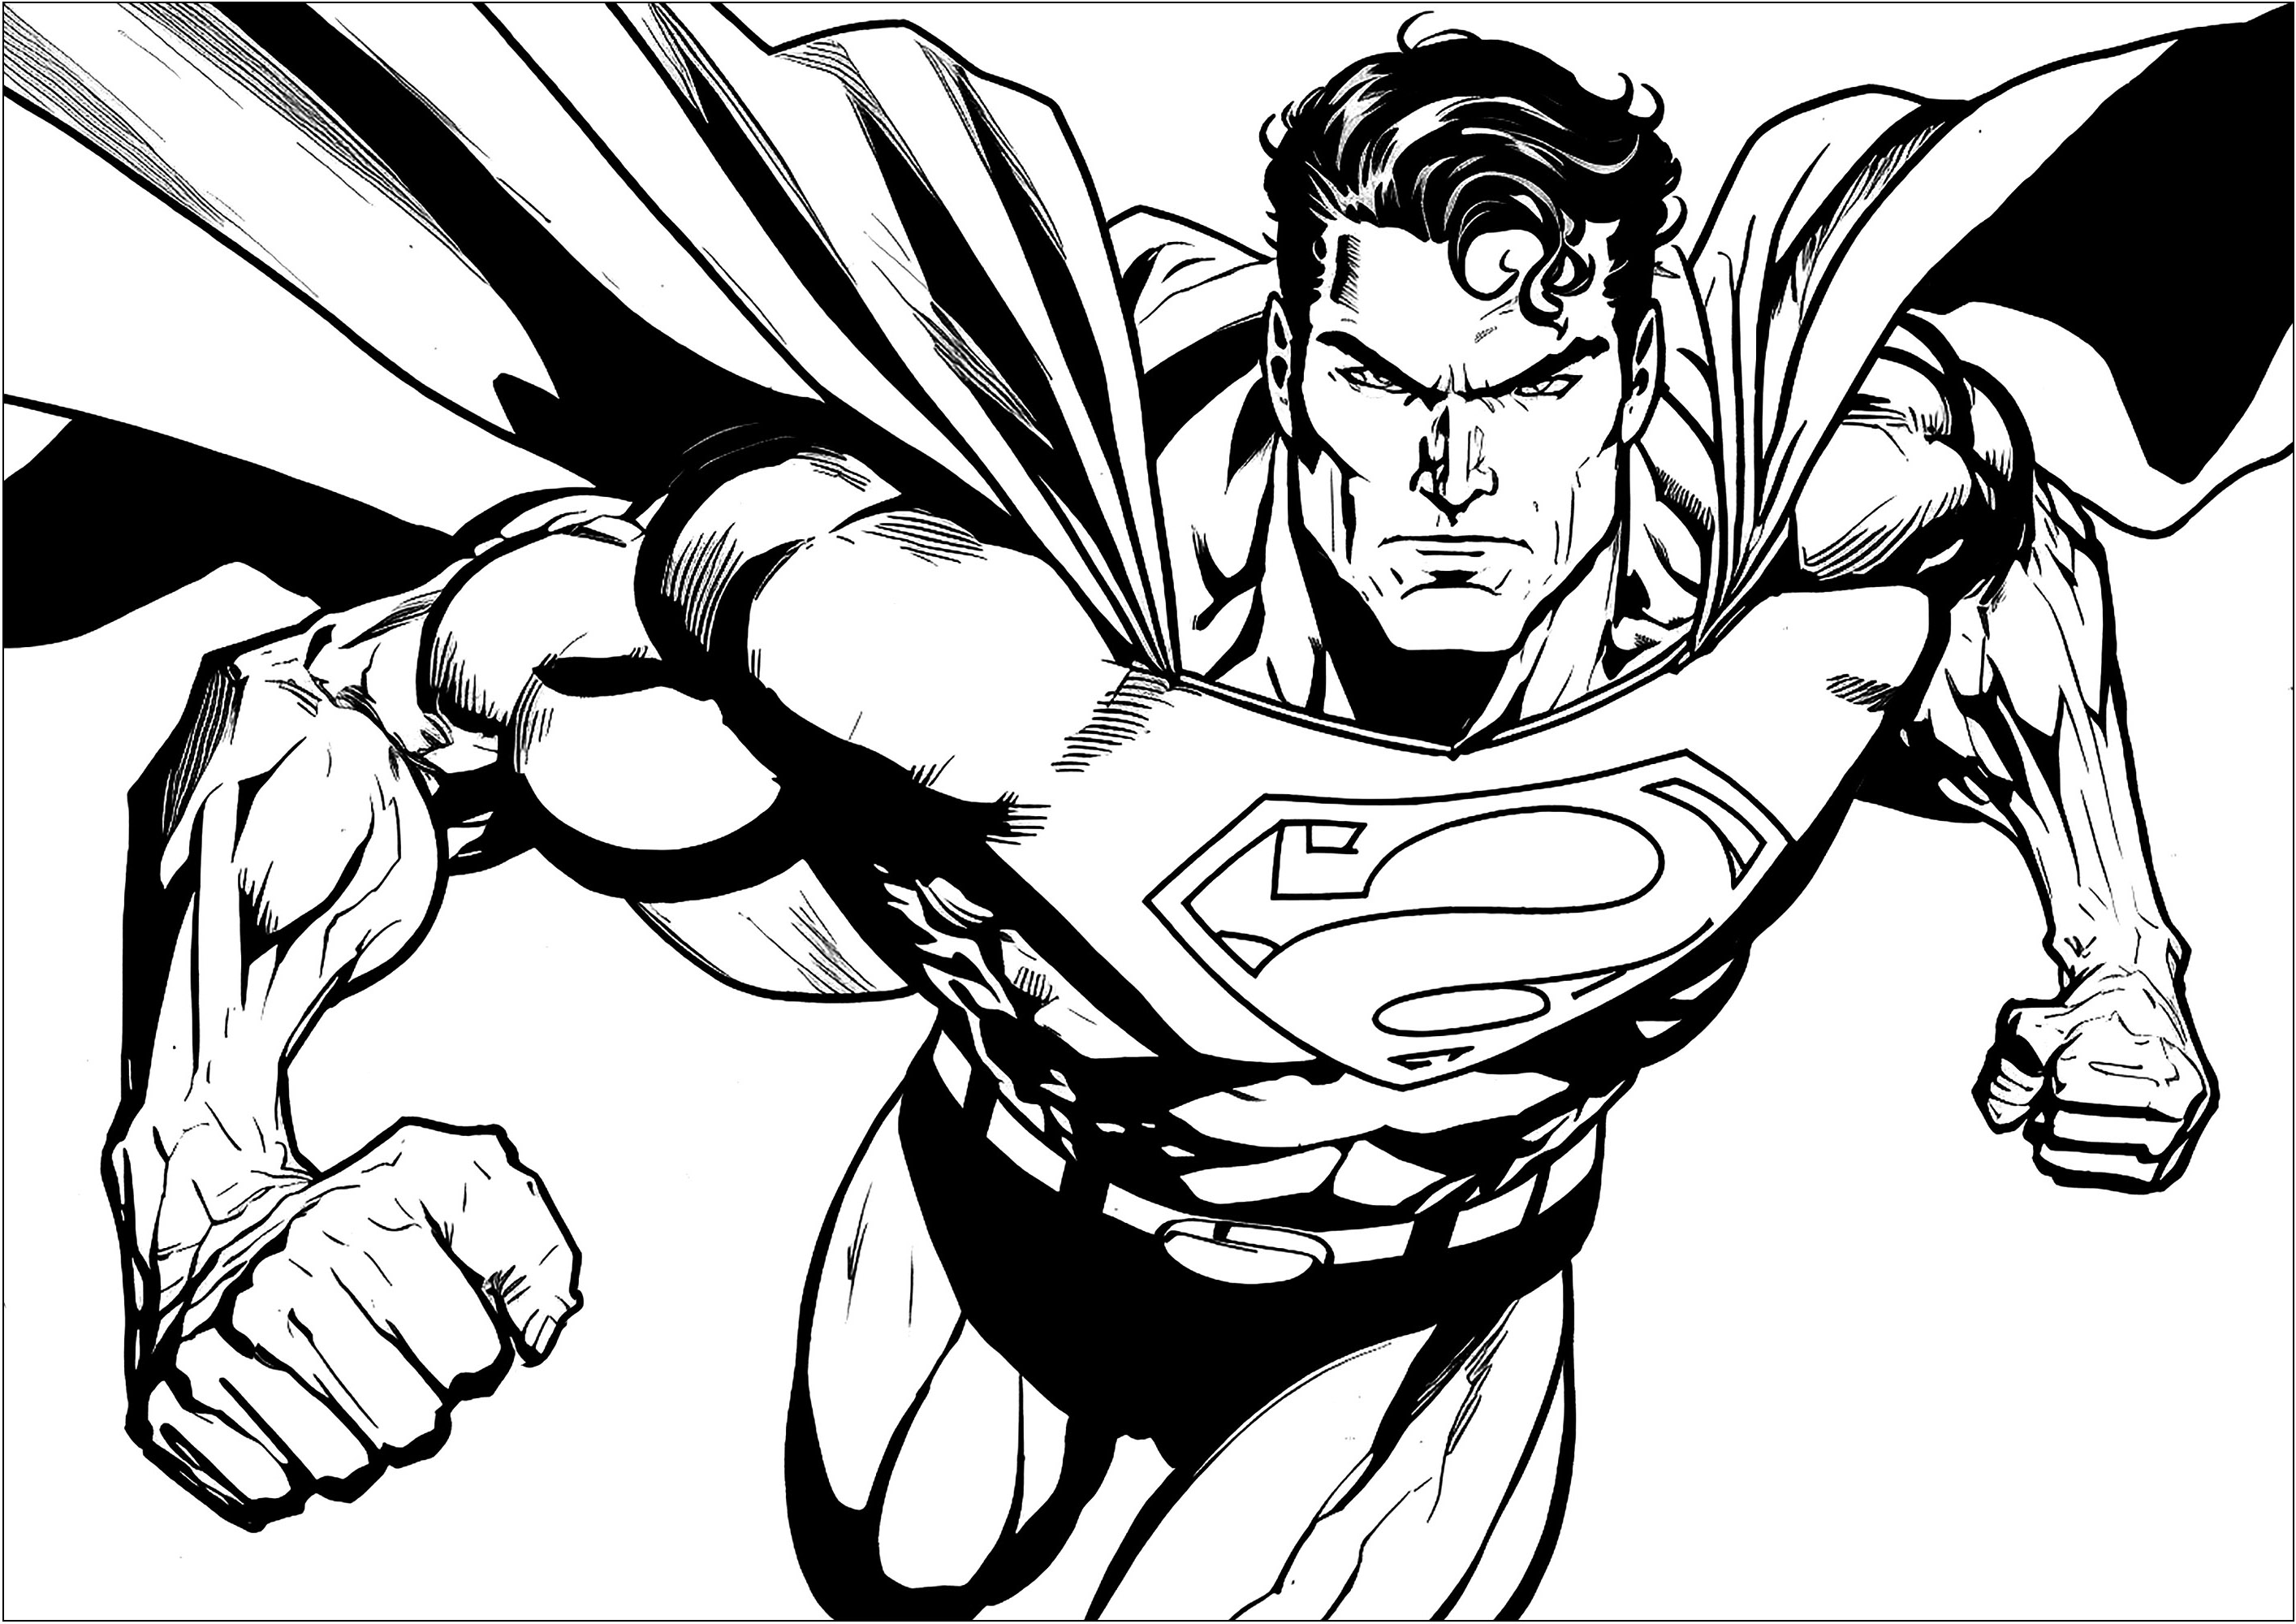 Superman flying in the sky, with his cape floating behind him. Kids will love coloring this superhero and their crayons and markers will help them bring this drawing to life.